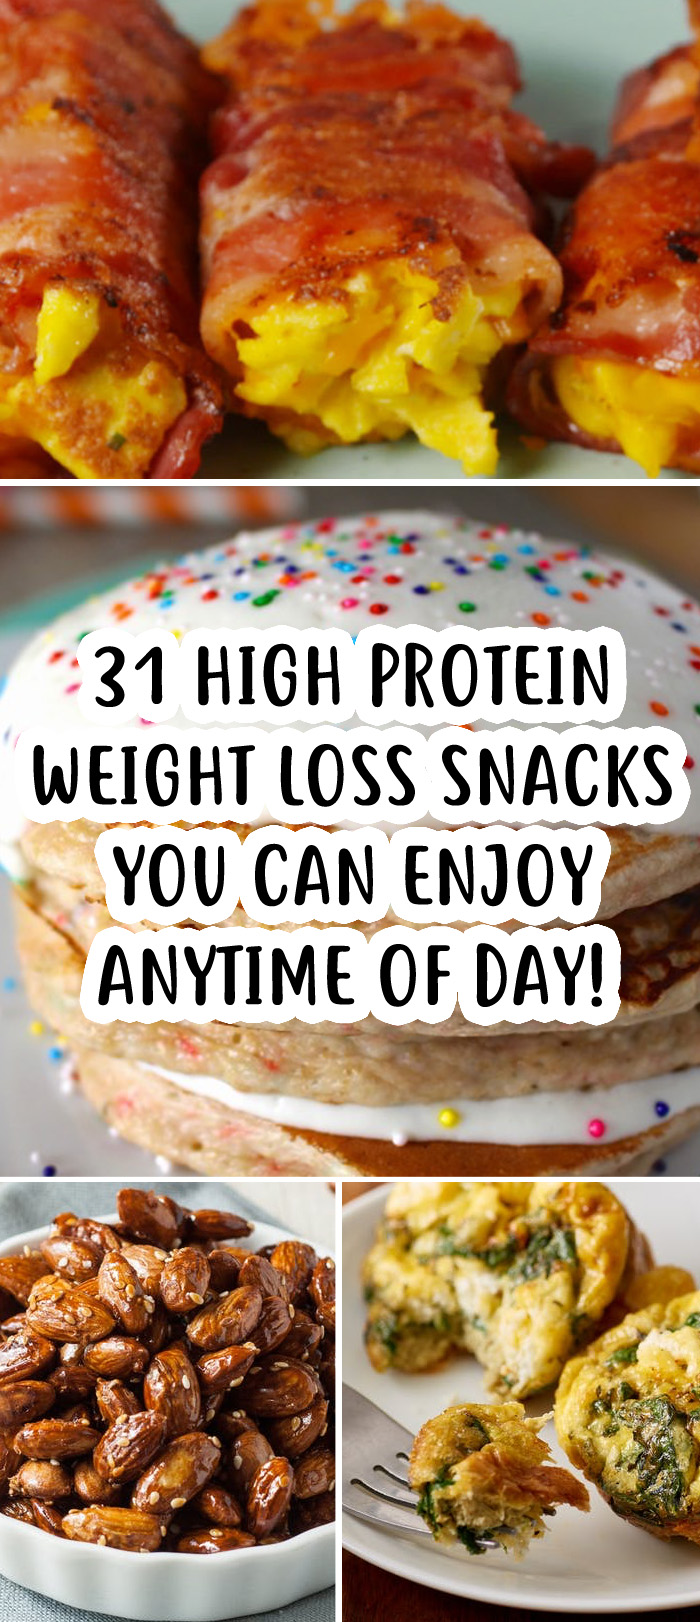 31 High Protein Weight Loss Snacks That You Can Enjoy Anytime Of Day ...